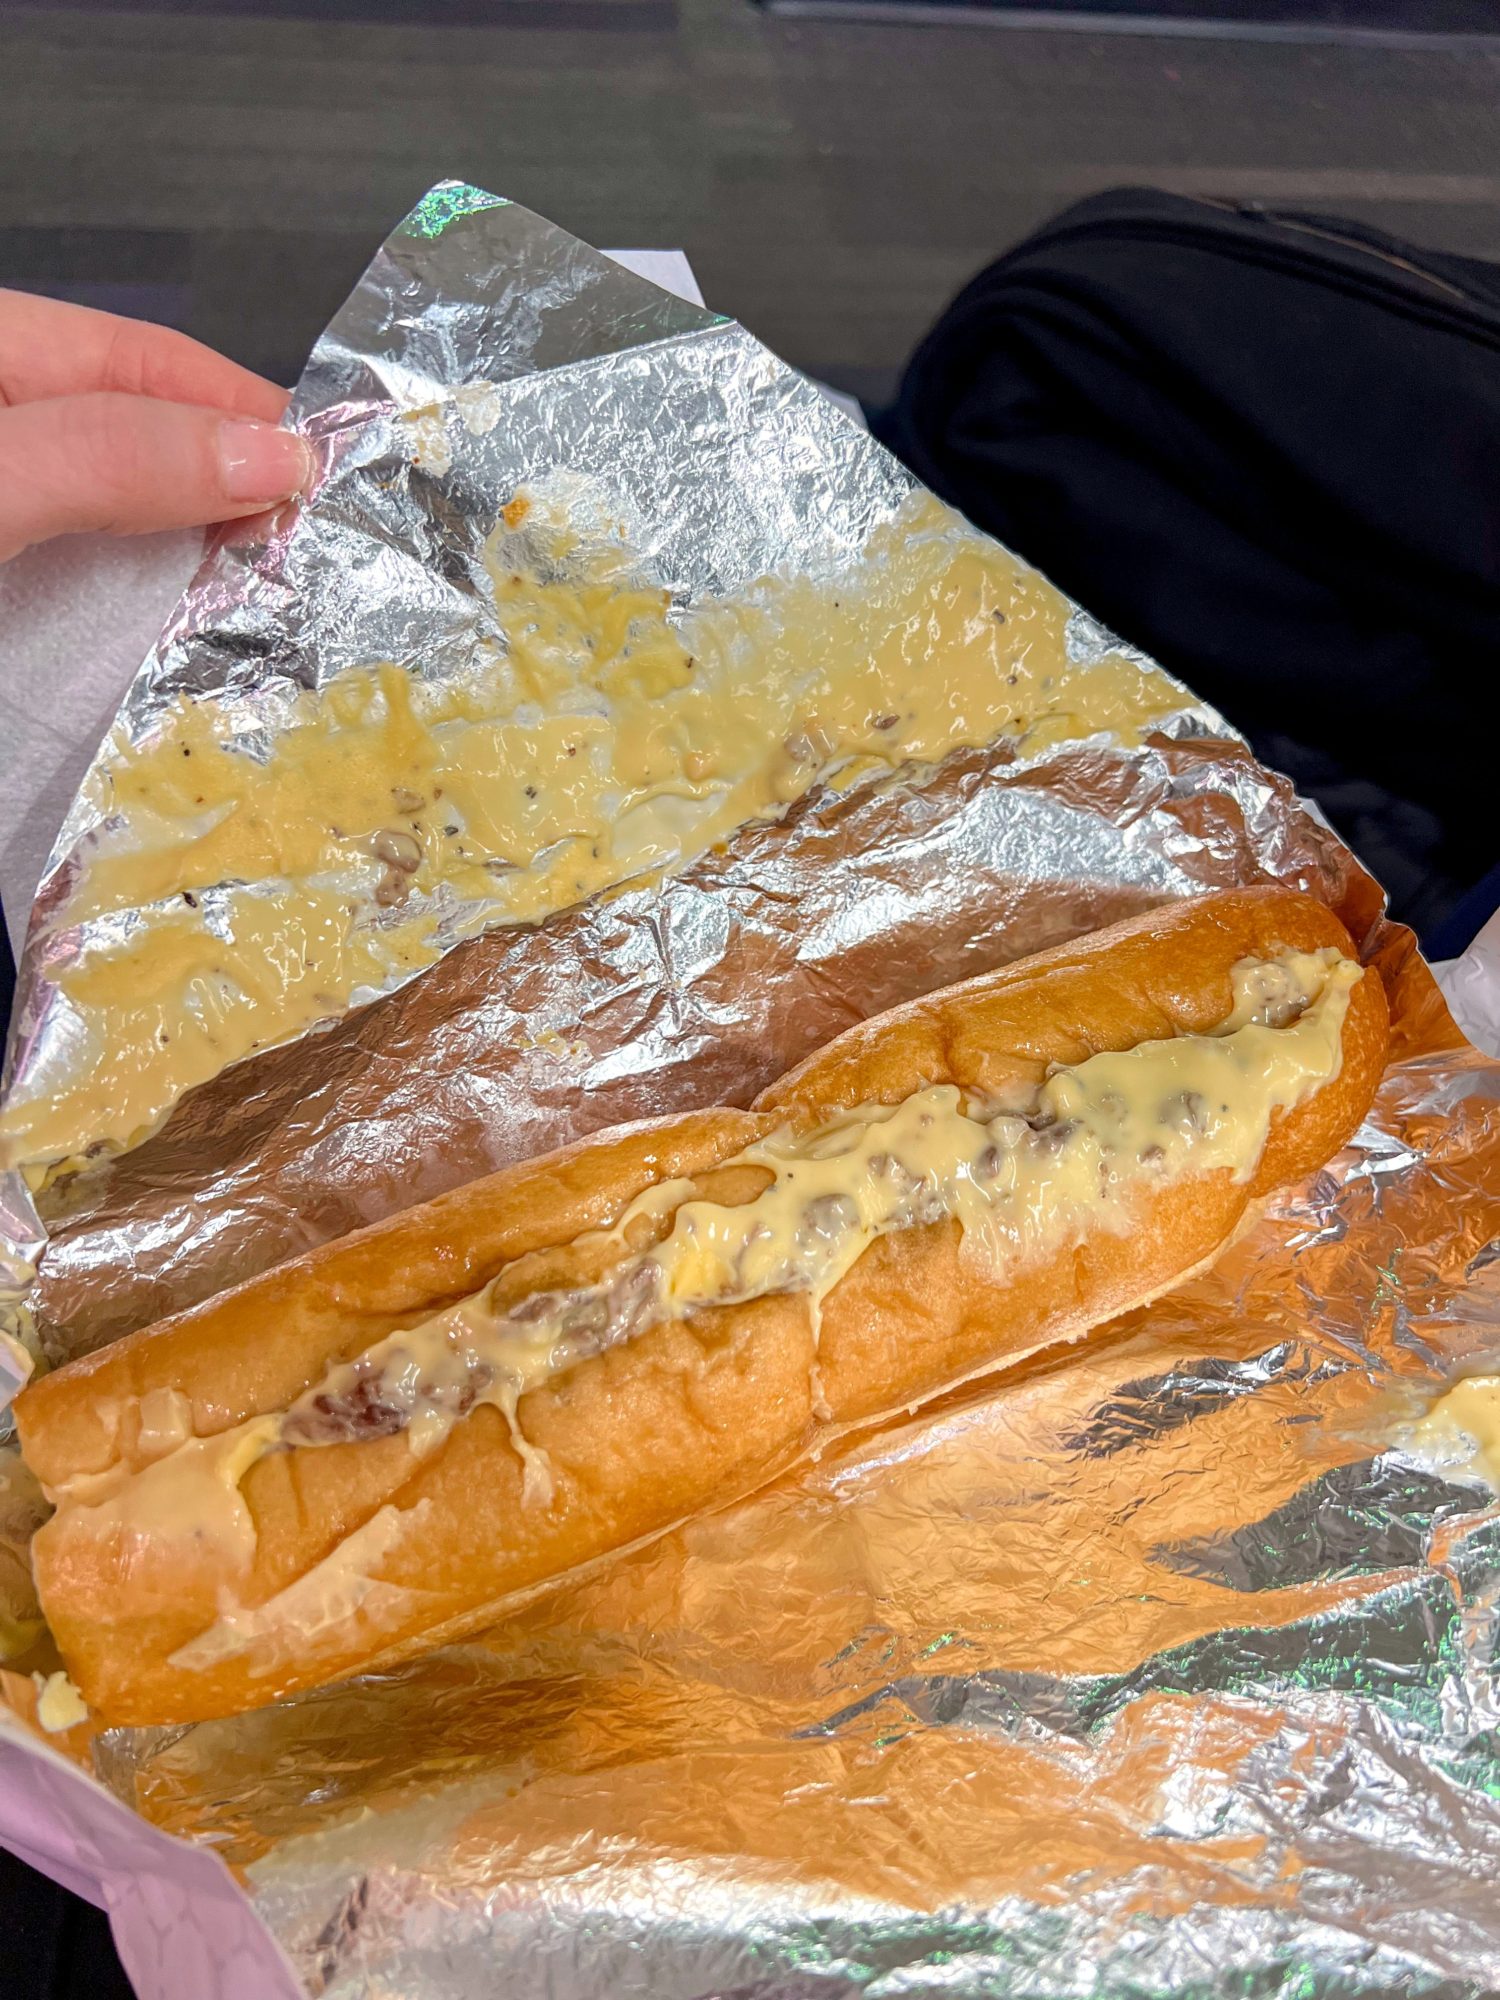 A Philly Cheesesteak